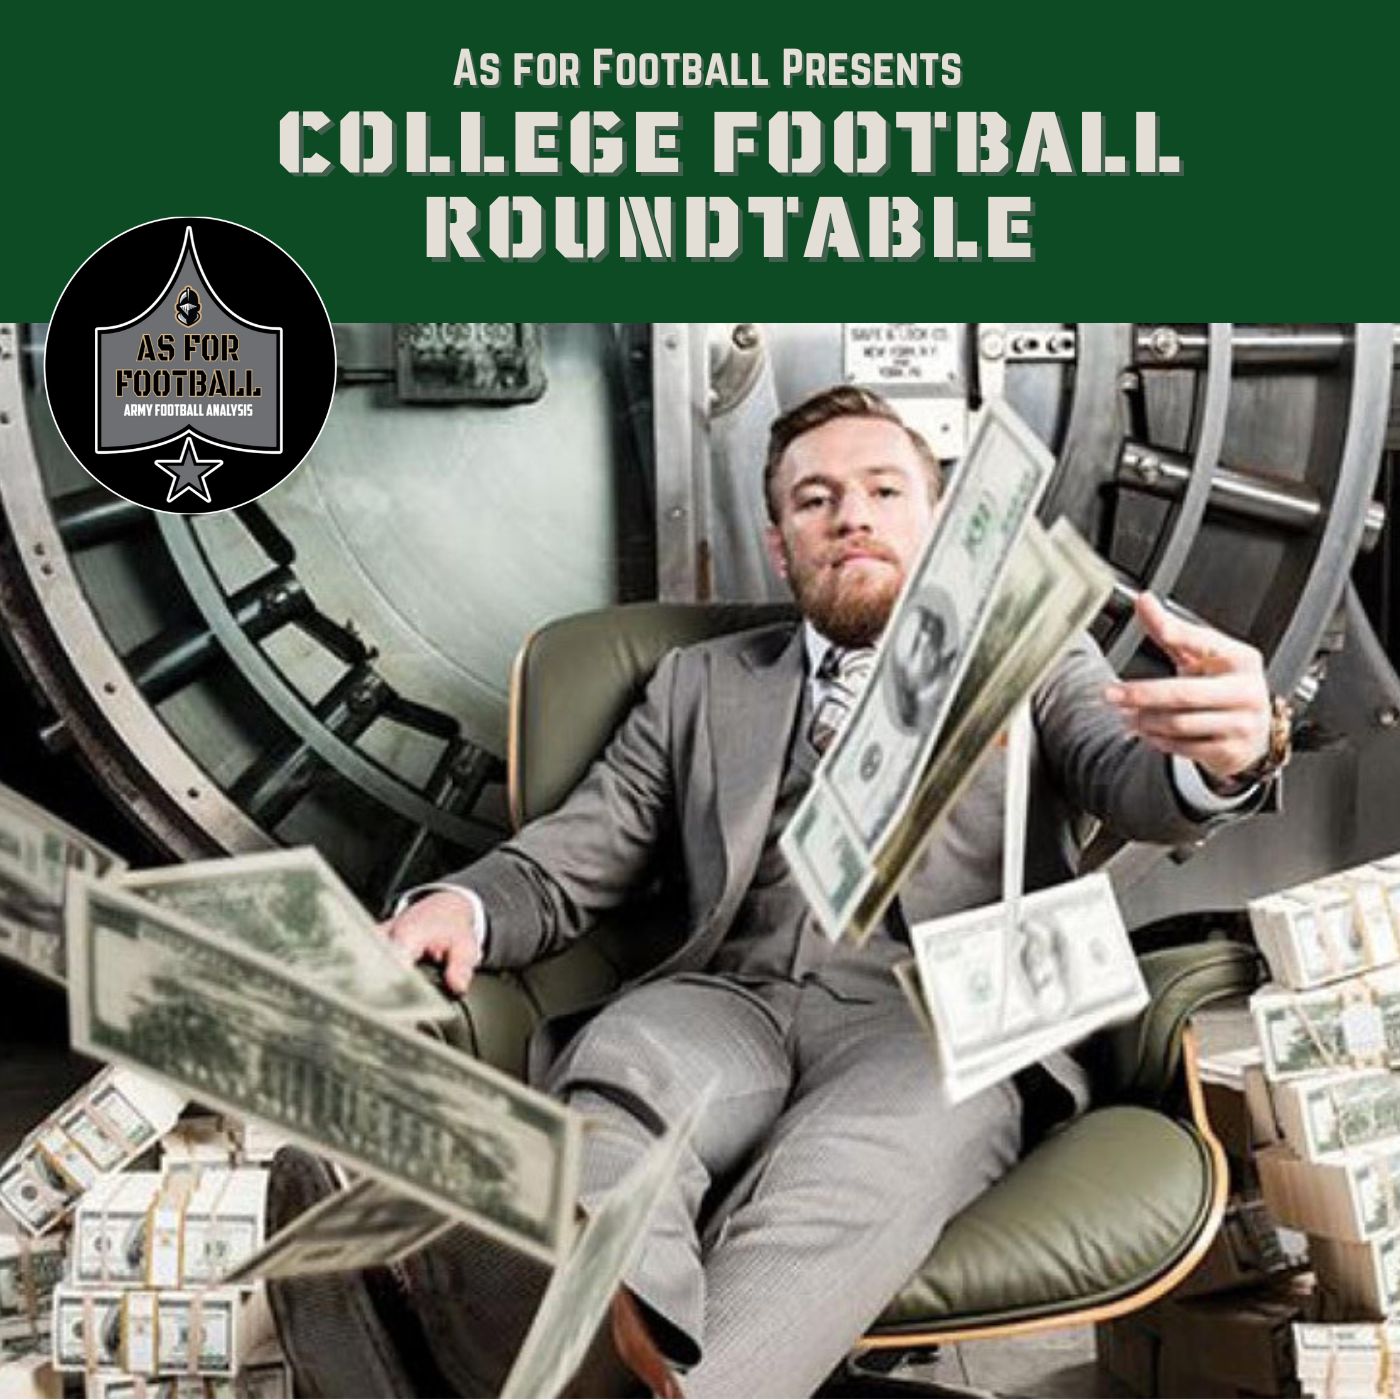 CFB Roundtable: It's the Wild West Out There!